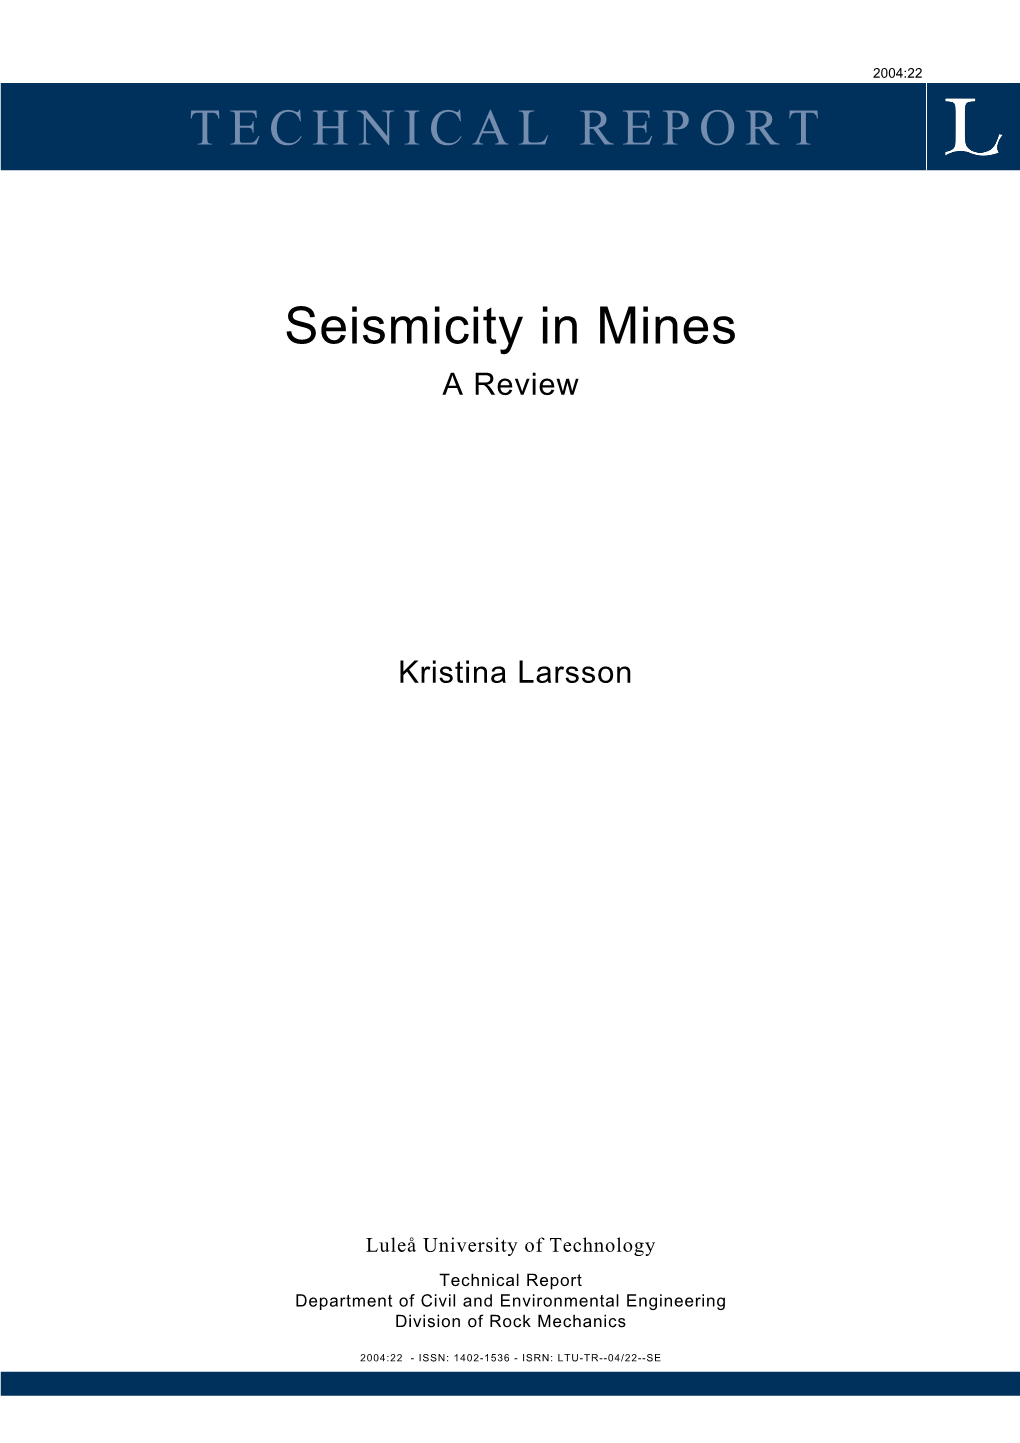 Seismicity in Mines a Review